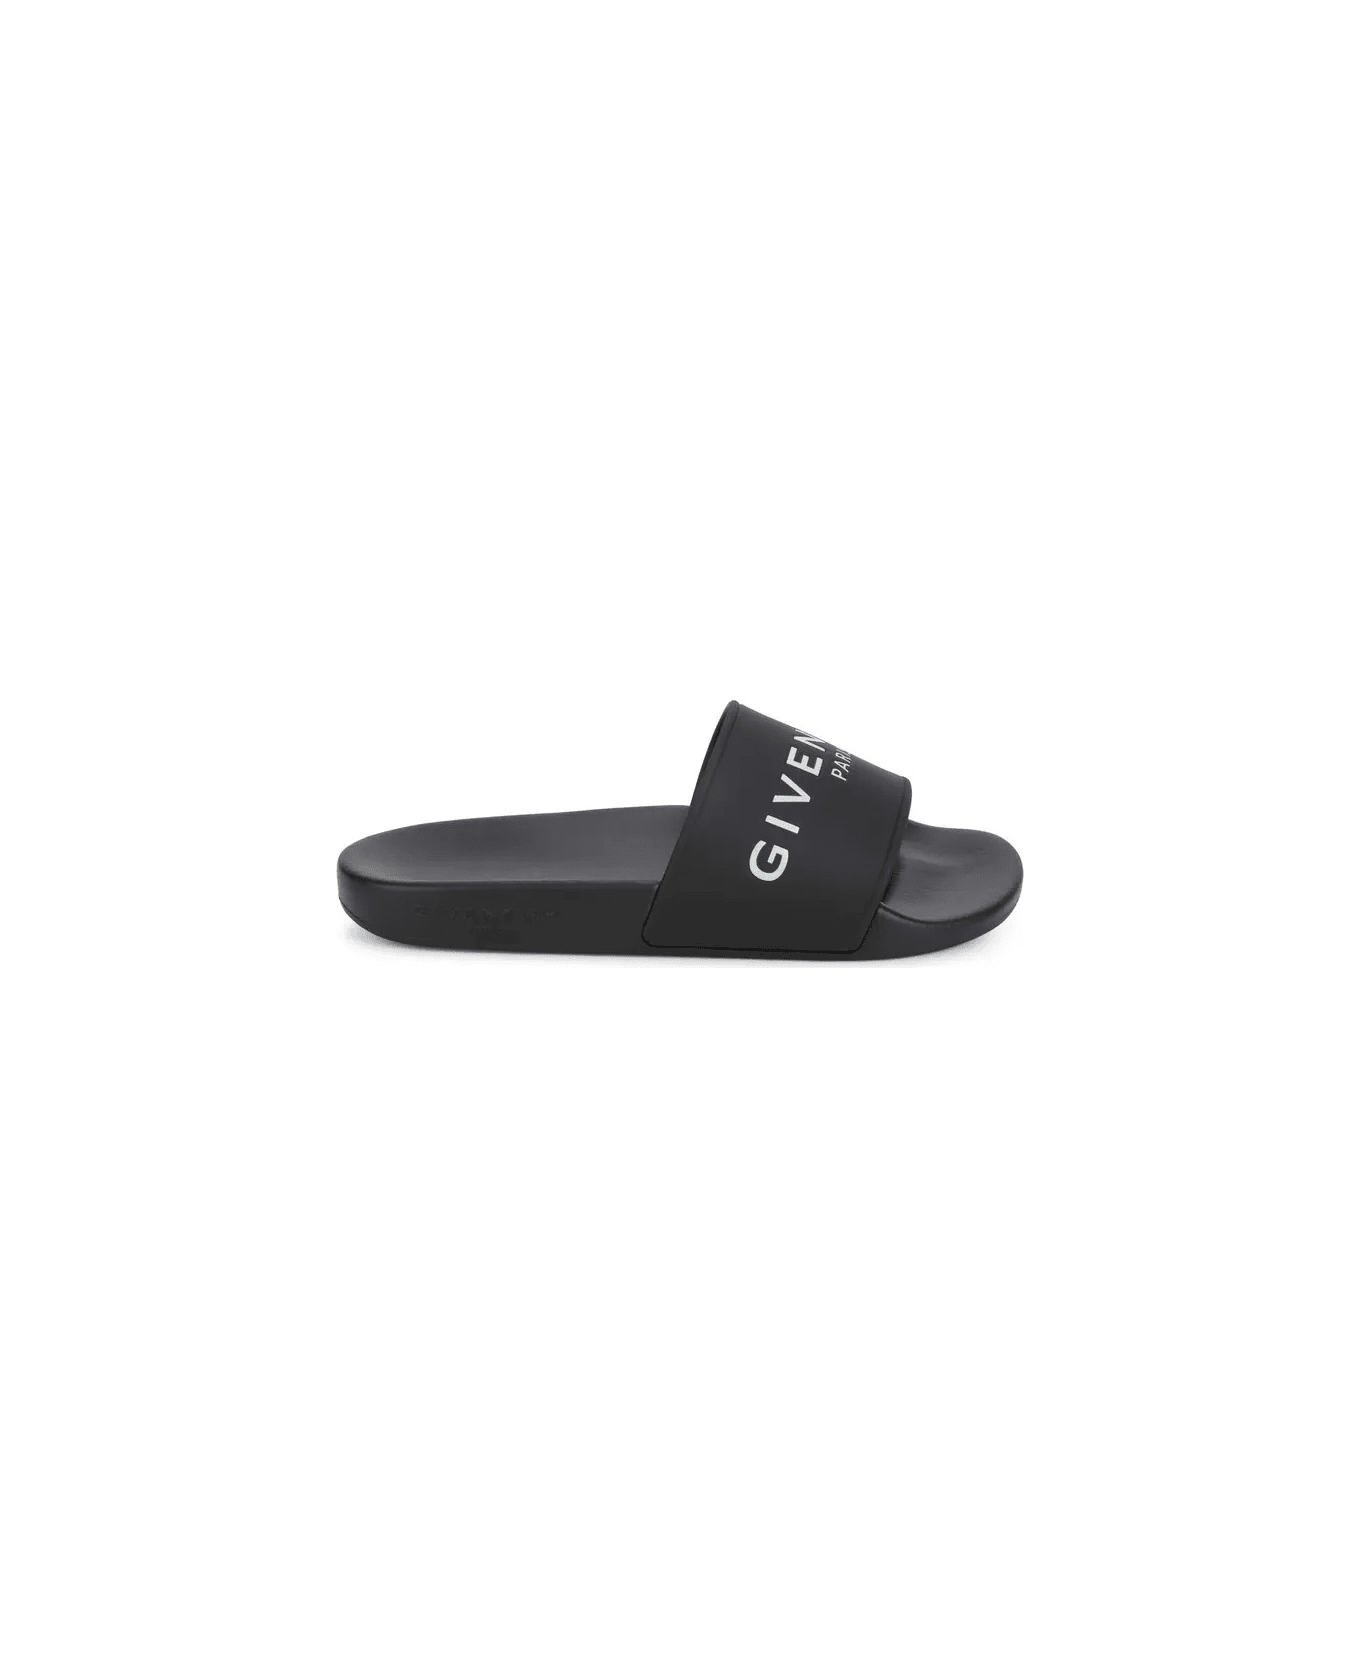 Givenchy Slippers In Black Rubber - Black シューズ